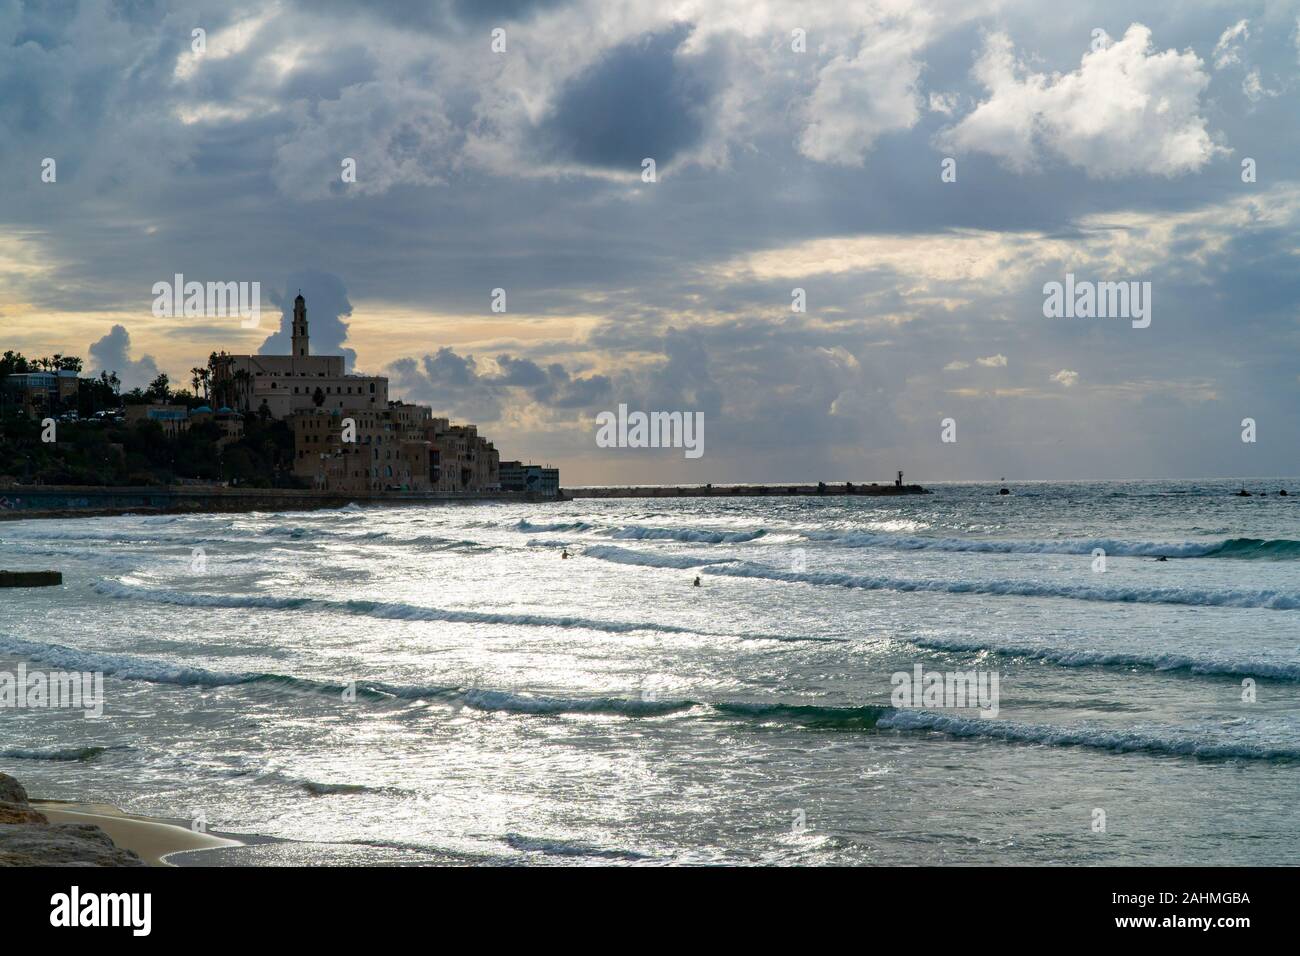 Israel, Tel Aviv, Jaffa, The silhouette of the Old Jaffa and the entrance to the port at sunset Stock Photo